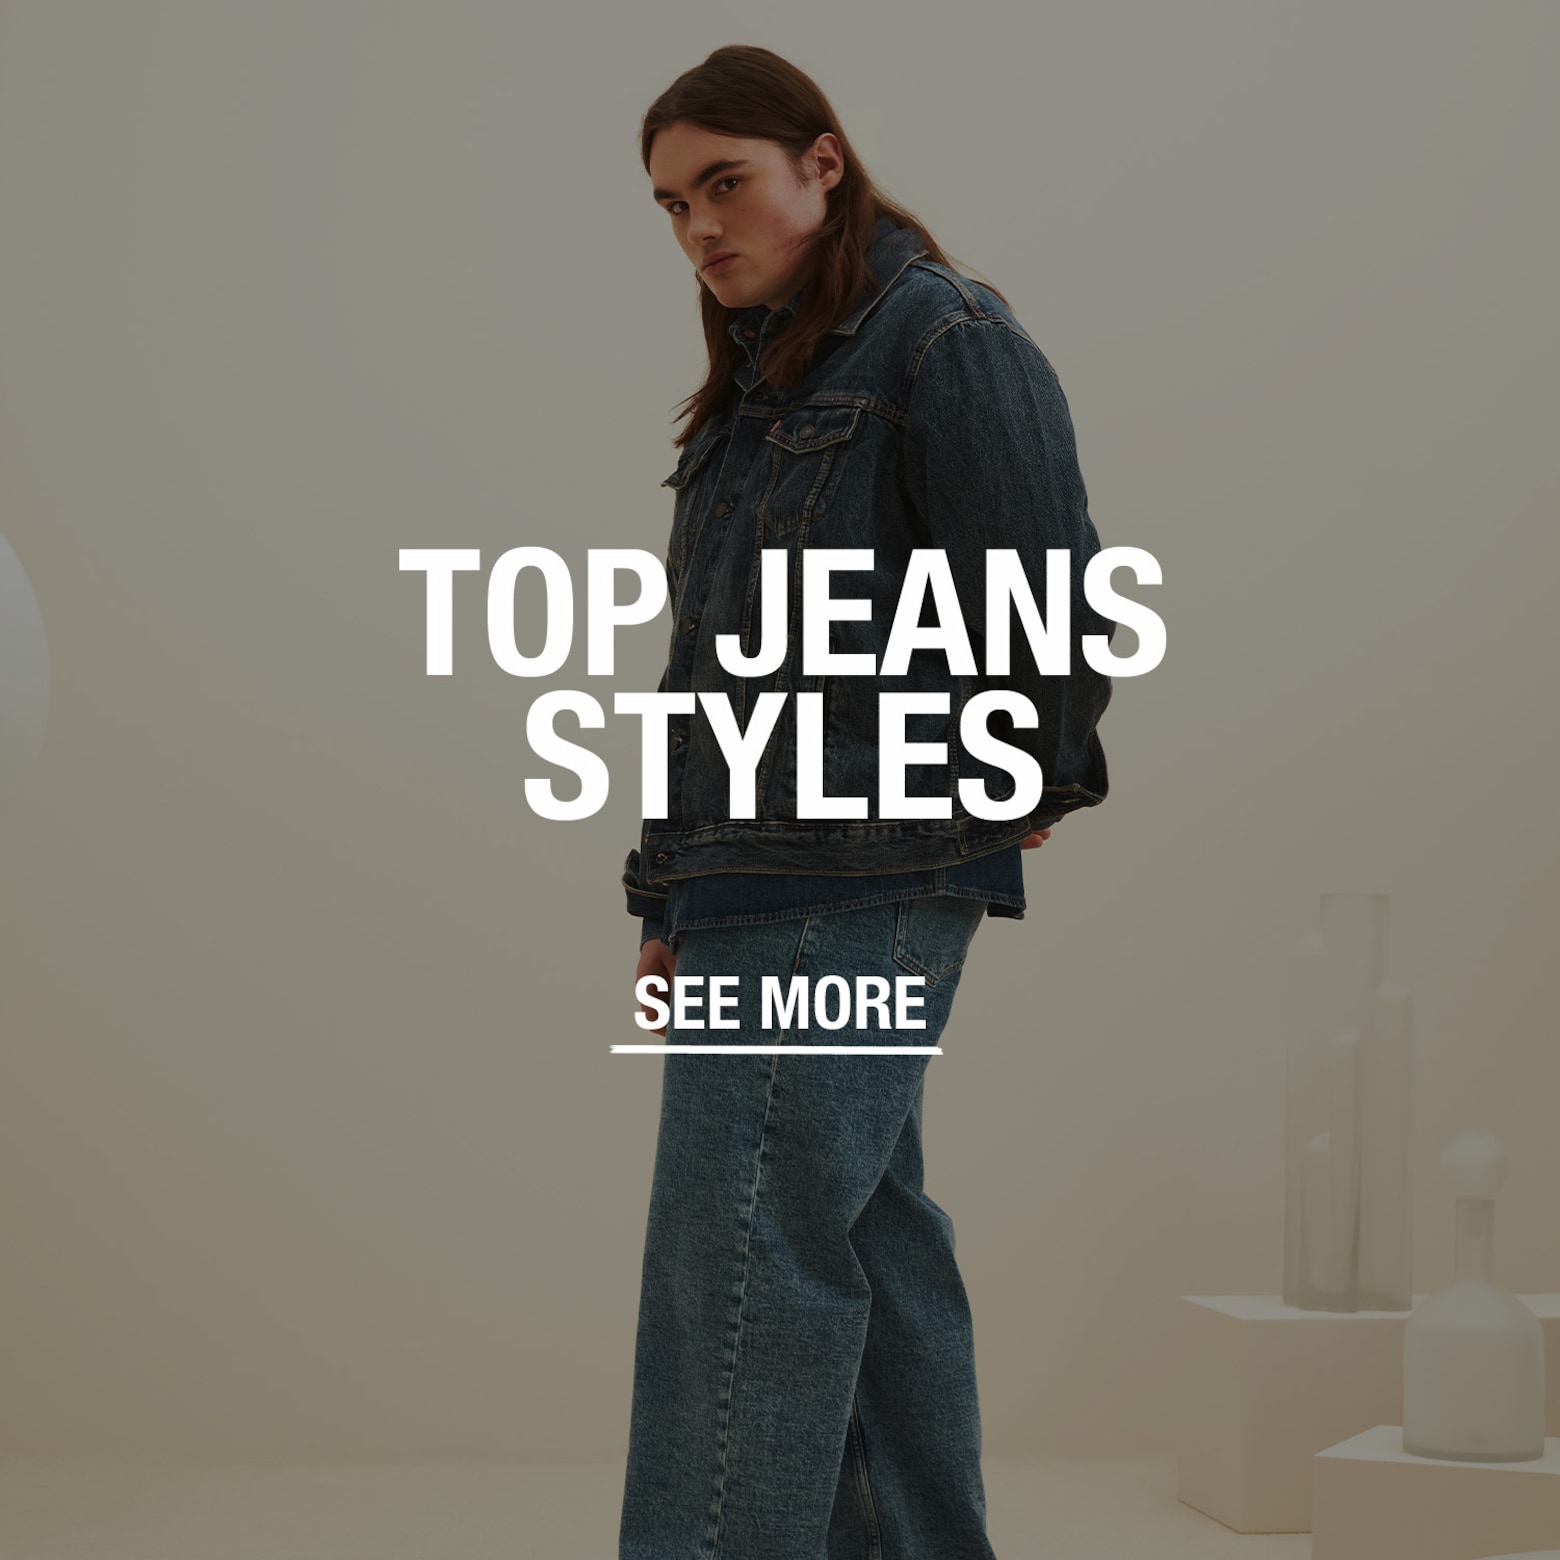 Find your perfect fit Best plus-sizes styles for men